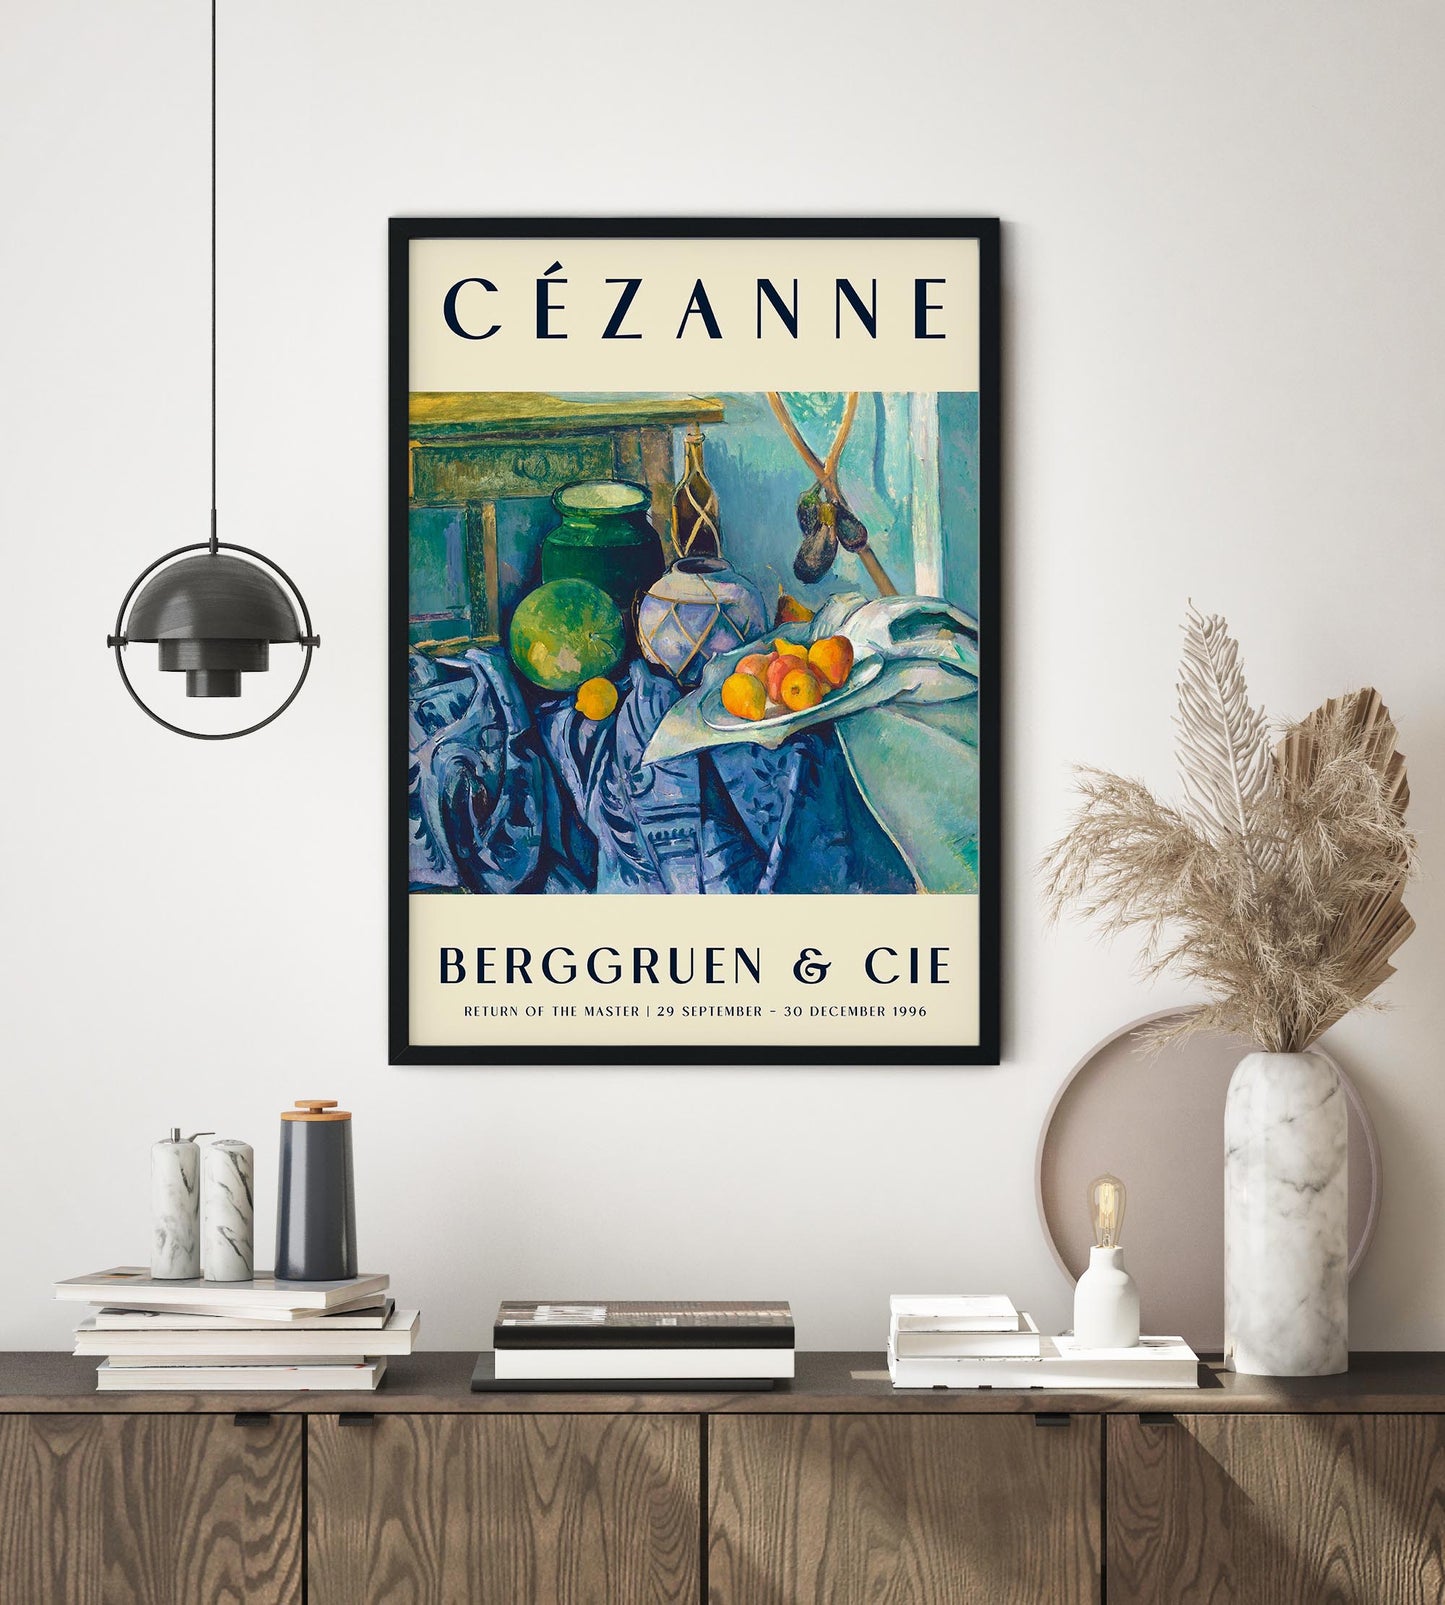 Cézanne Still Life with Apples II Art Exhibition Poster